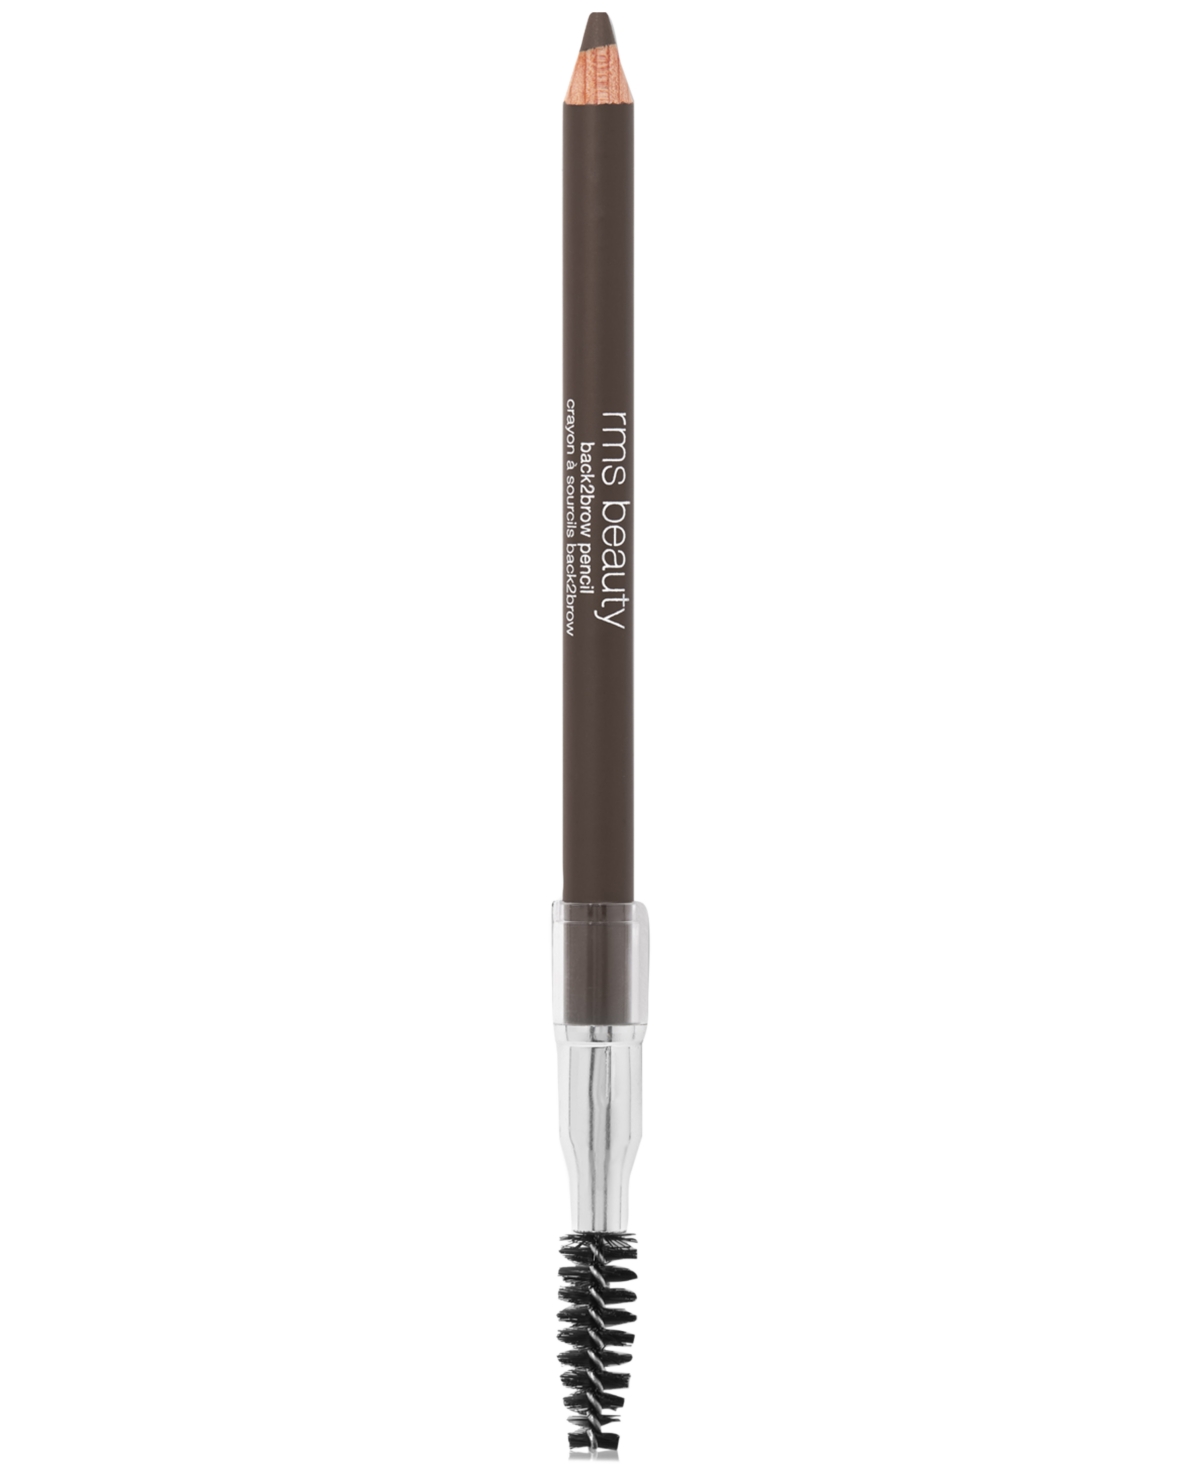 Rms Beauty Back2brow Pencil In Dark